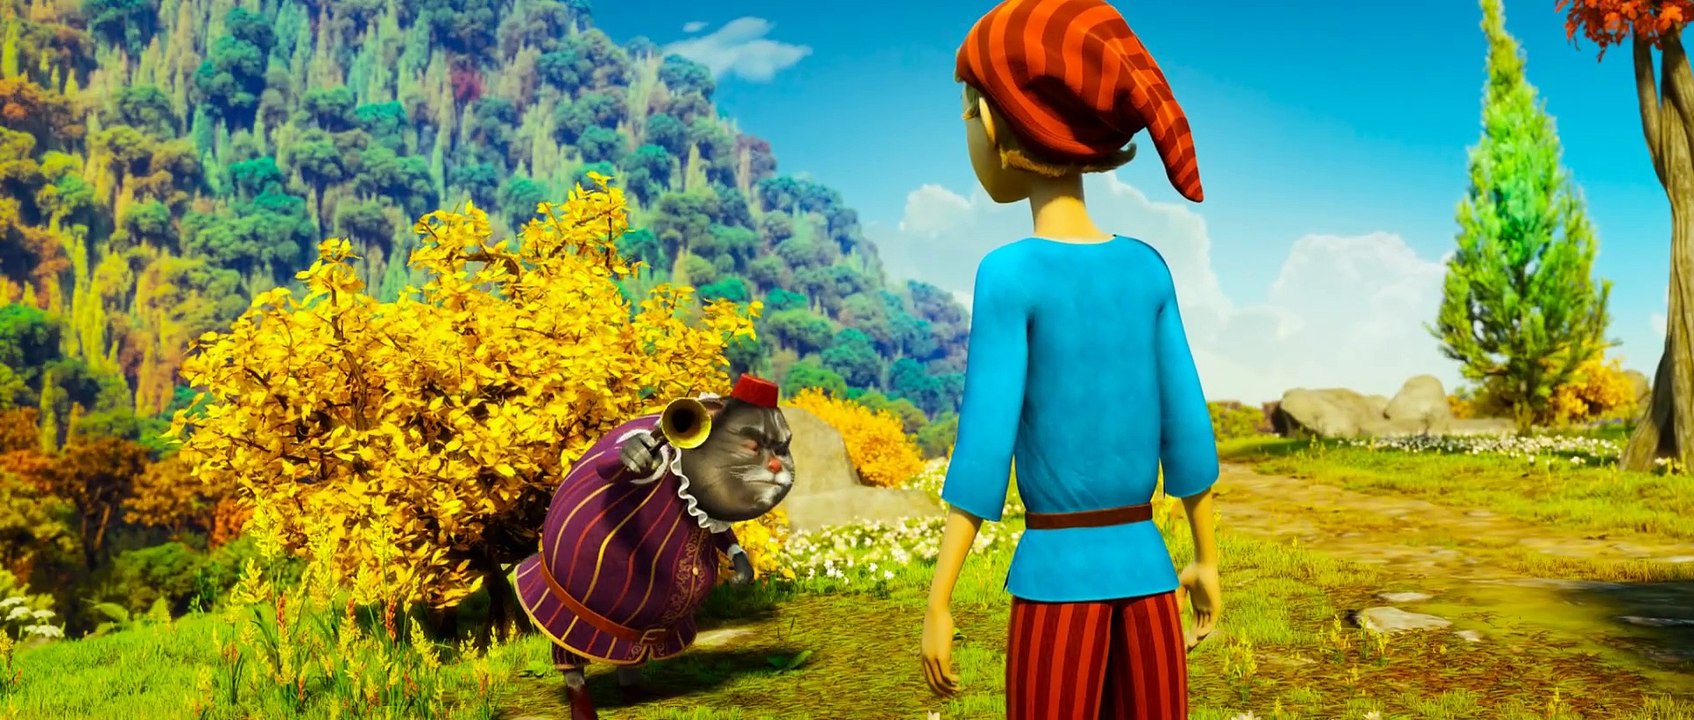 Pinocchio- A True Story Full Movie Watch Online 123Movies